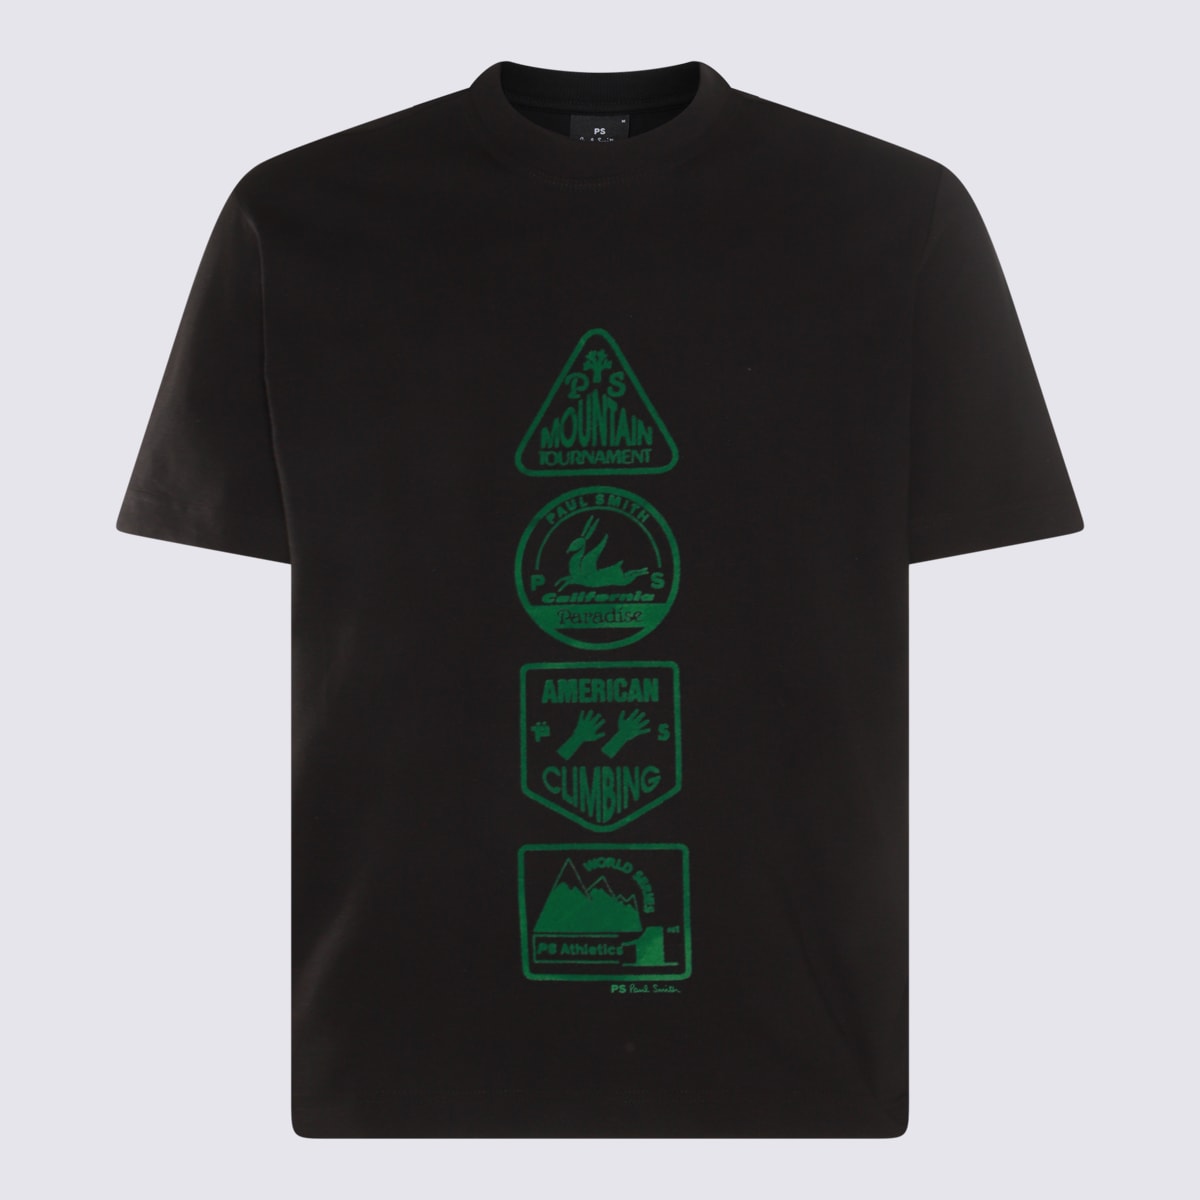 Paul Smith Black And Green Cotton T-shirt